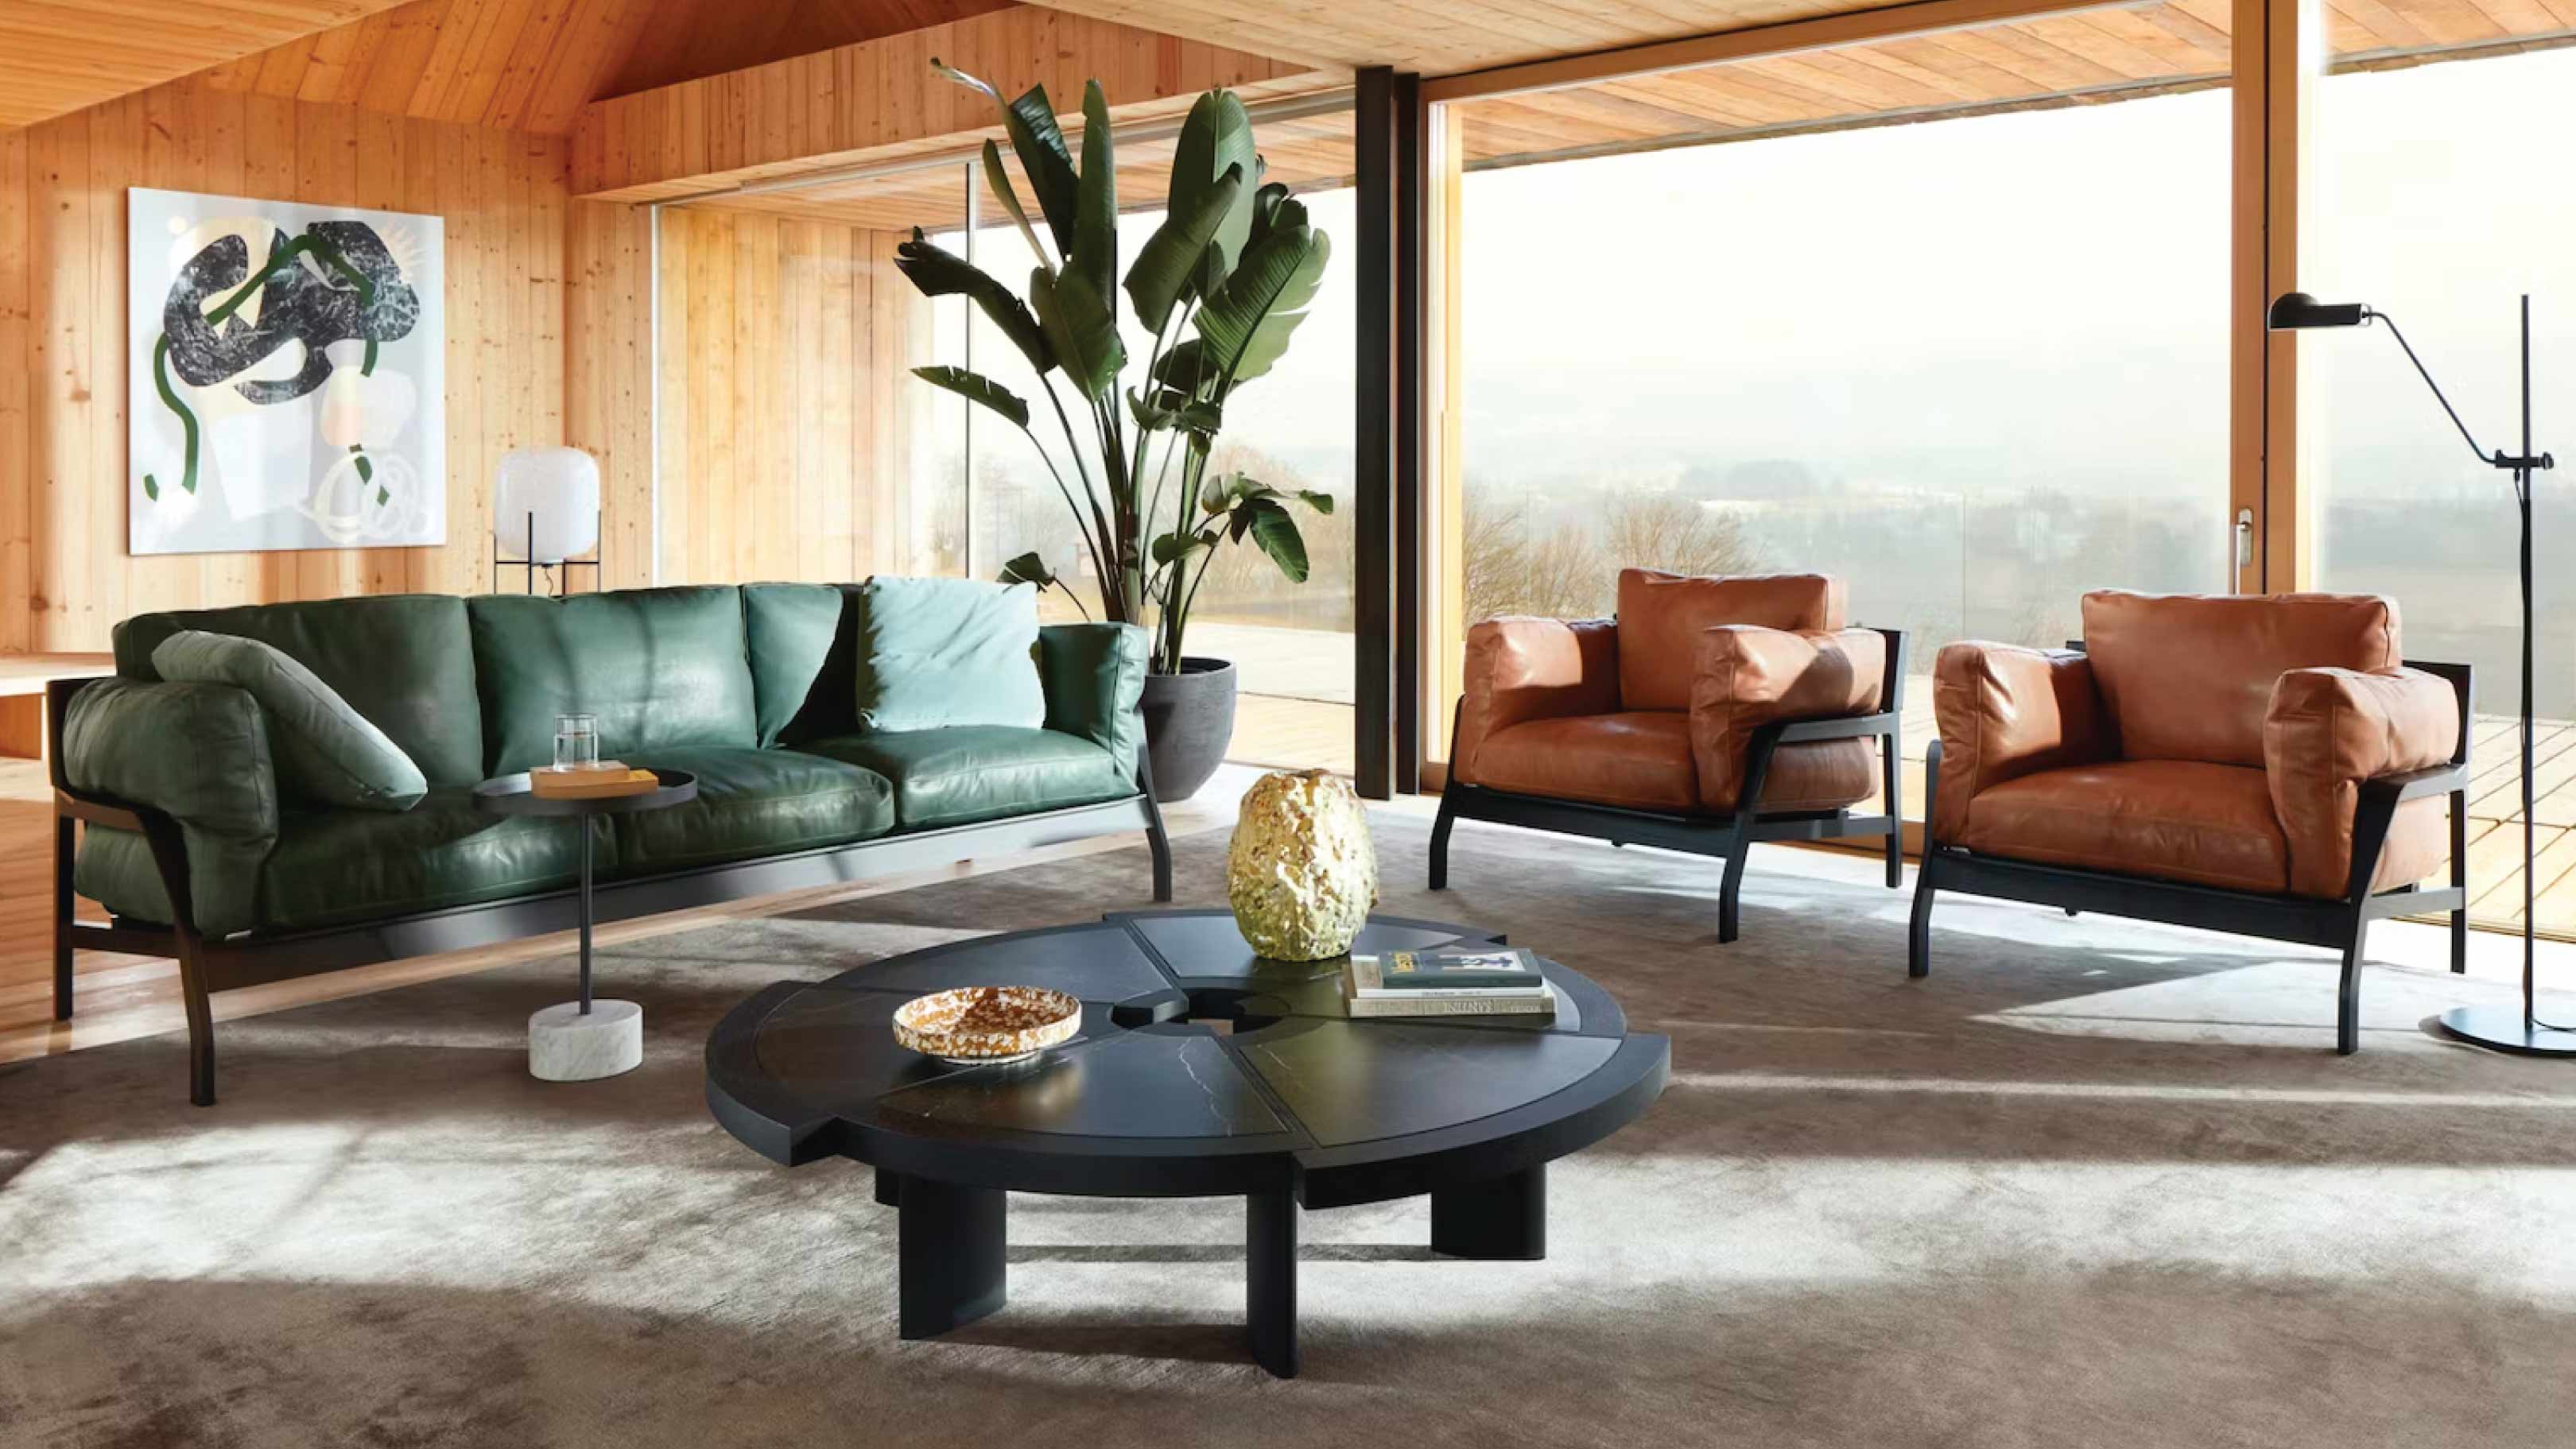 Cassina Mexique Coffee Table by Charlotte Perriand